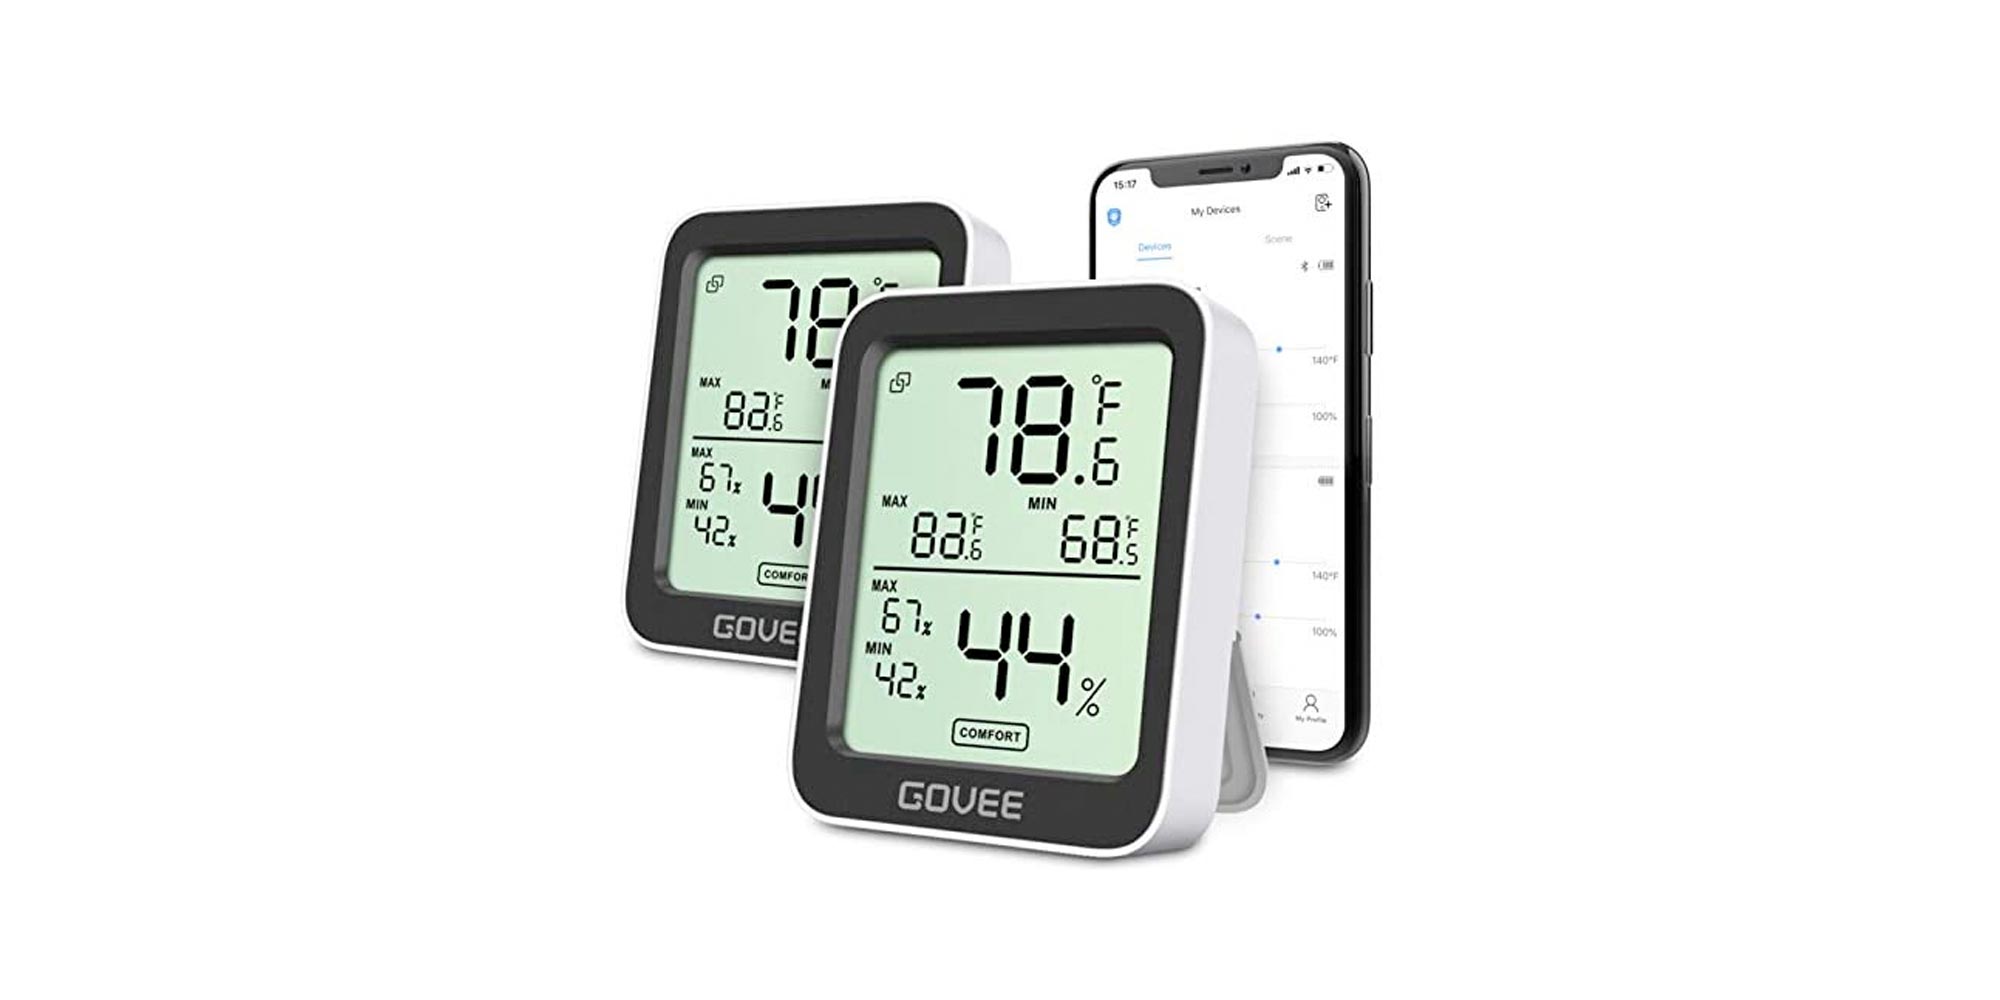 https://9to5toys.com/wp-content/uploads/sites/5/2020/10/govee-thermometer-hygrometer.jpg